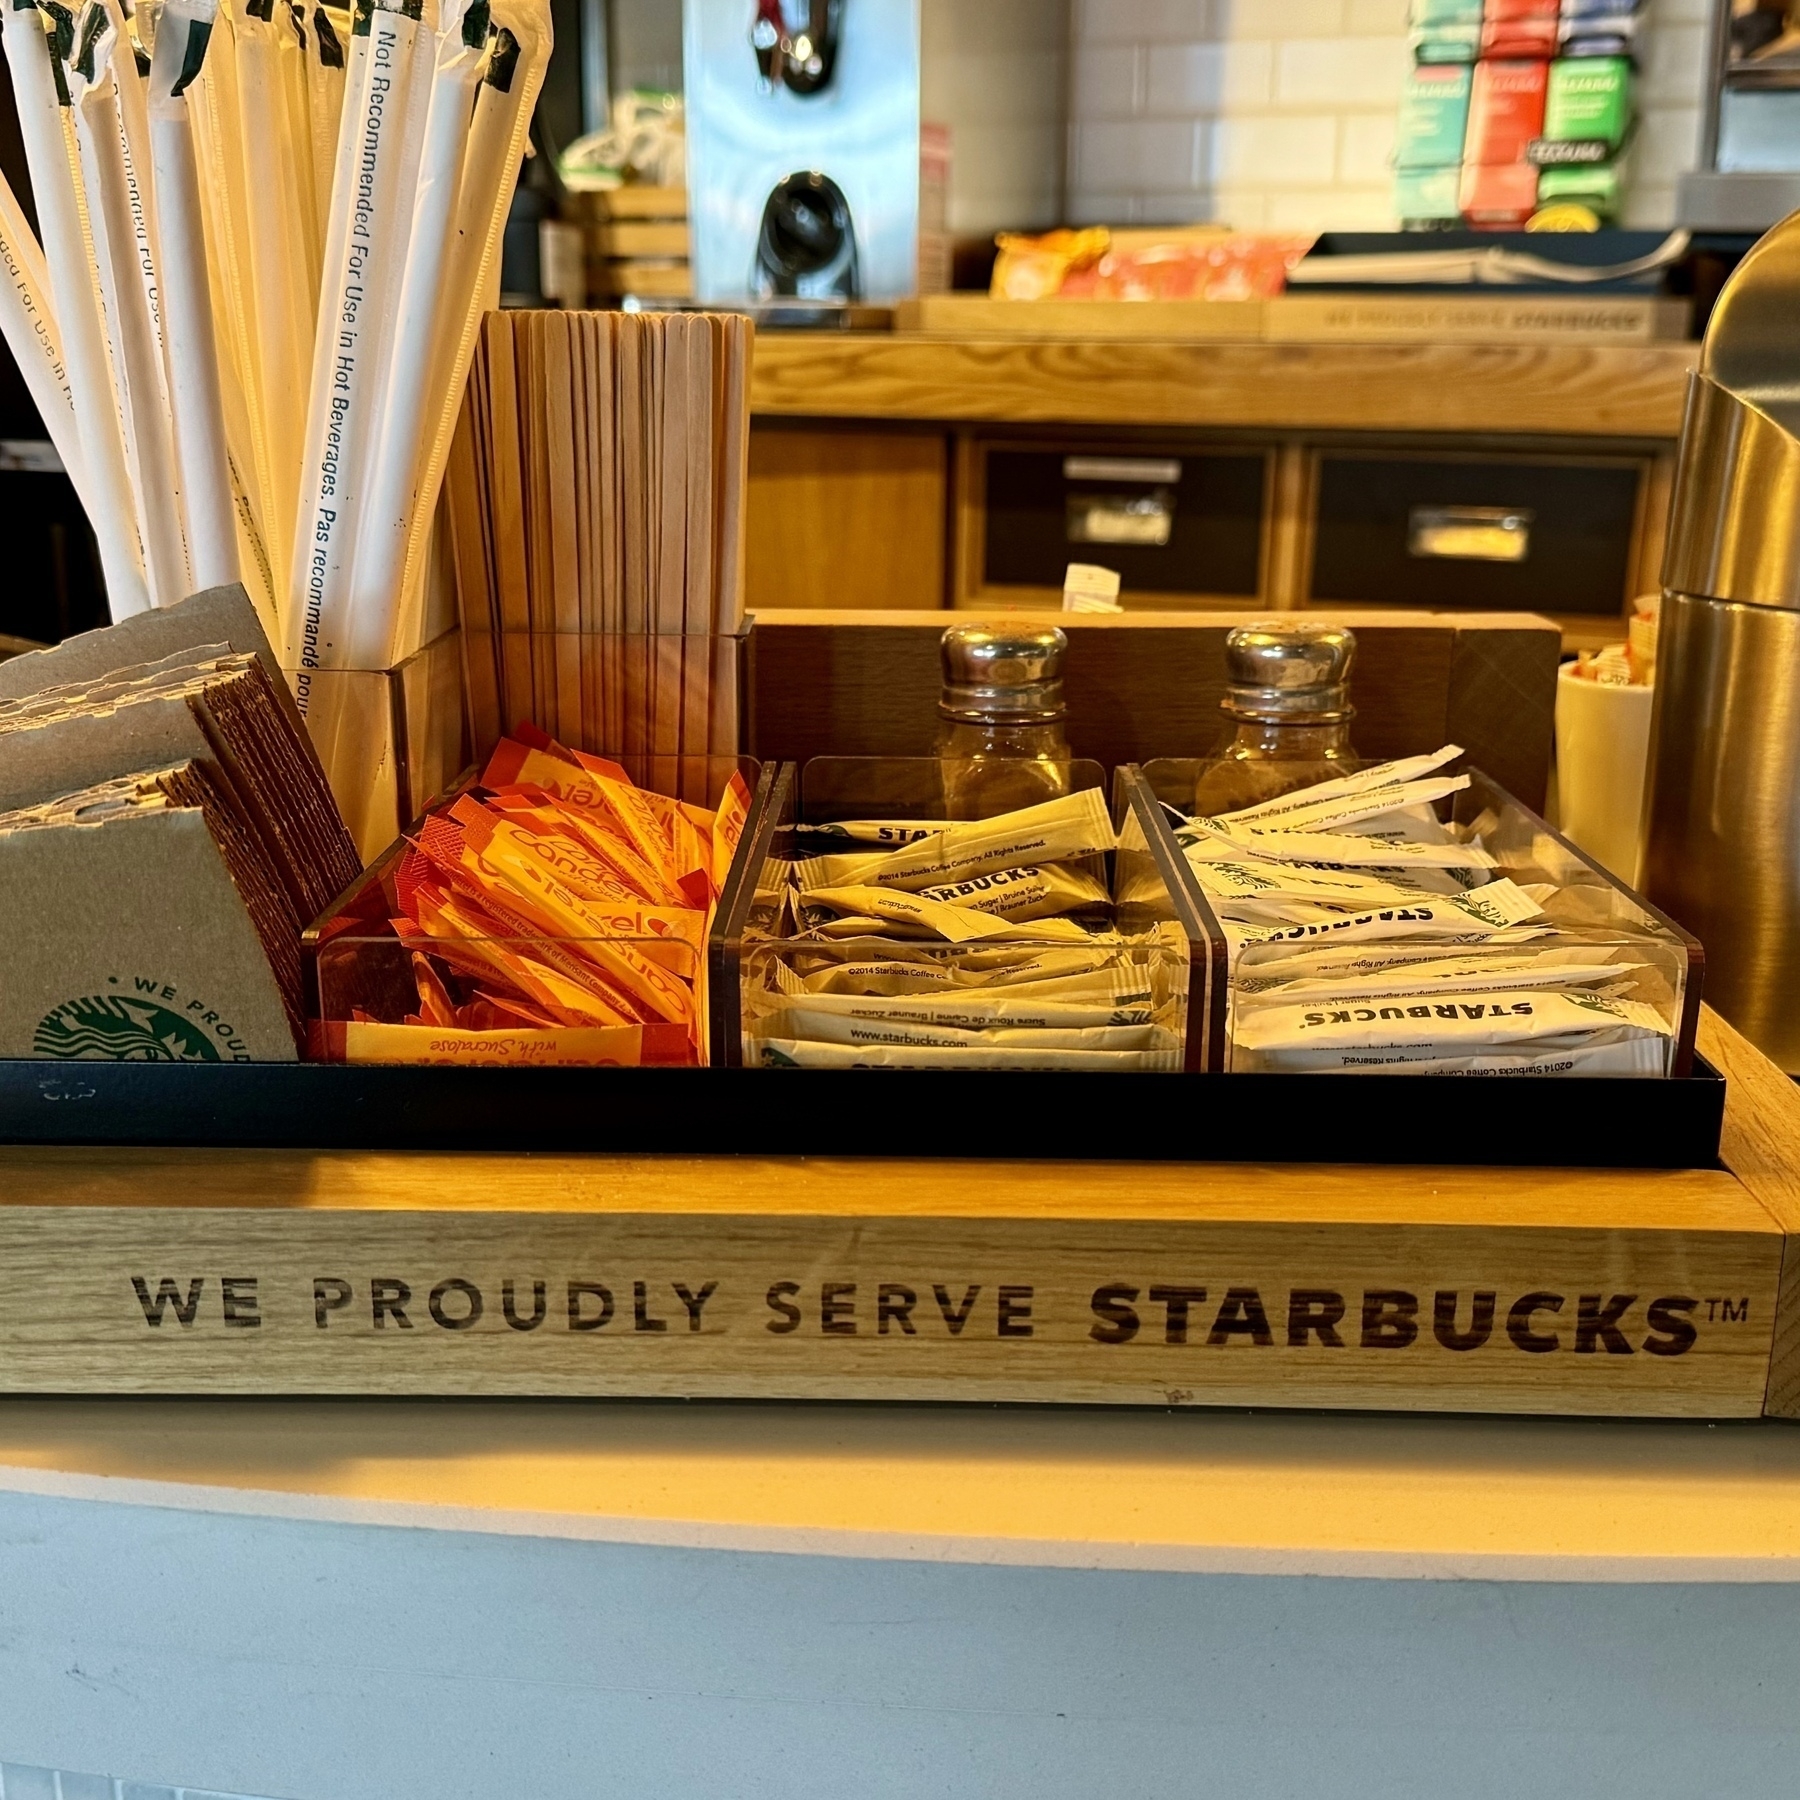 A sign that says the hotel bar “proudly serve Starbucks”